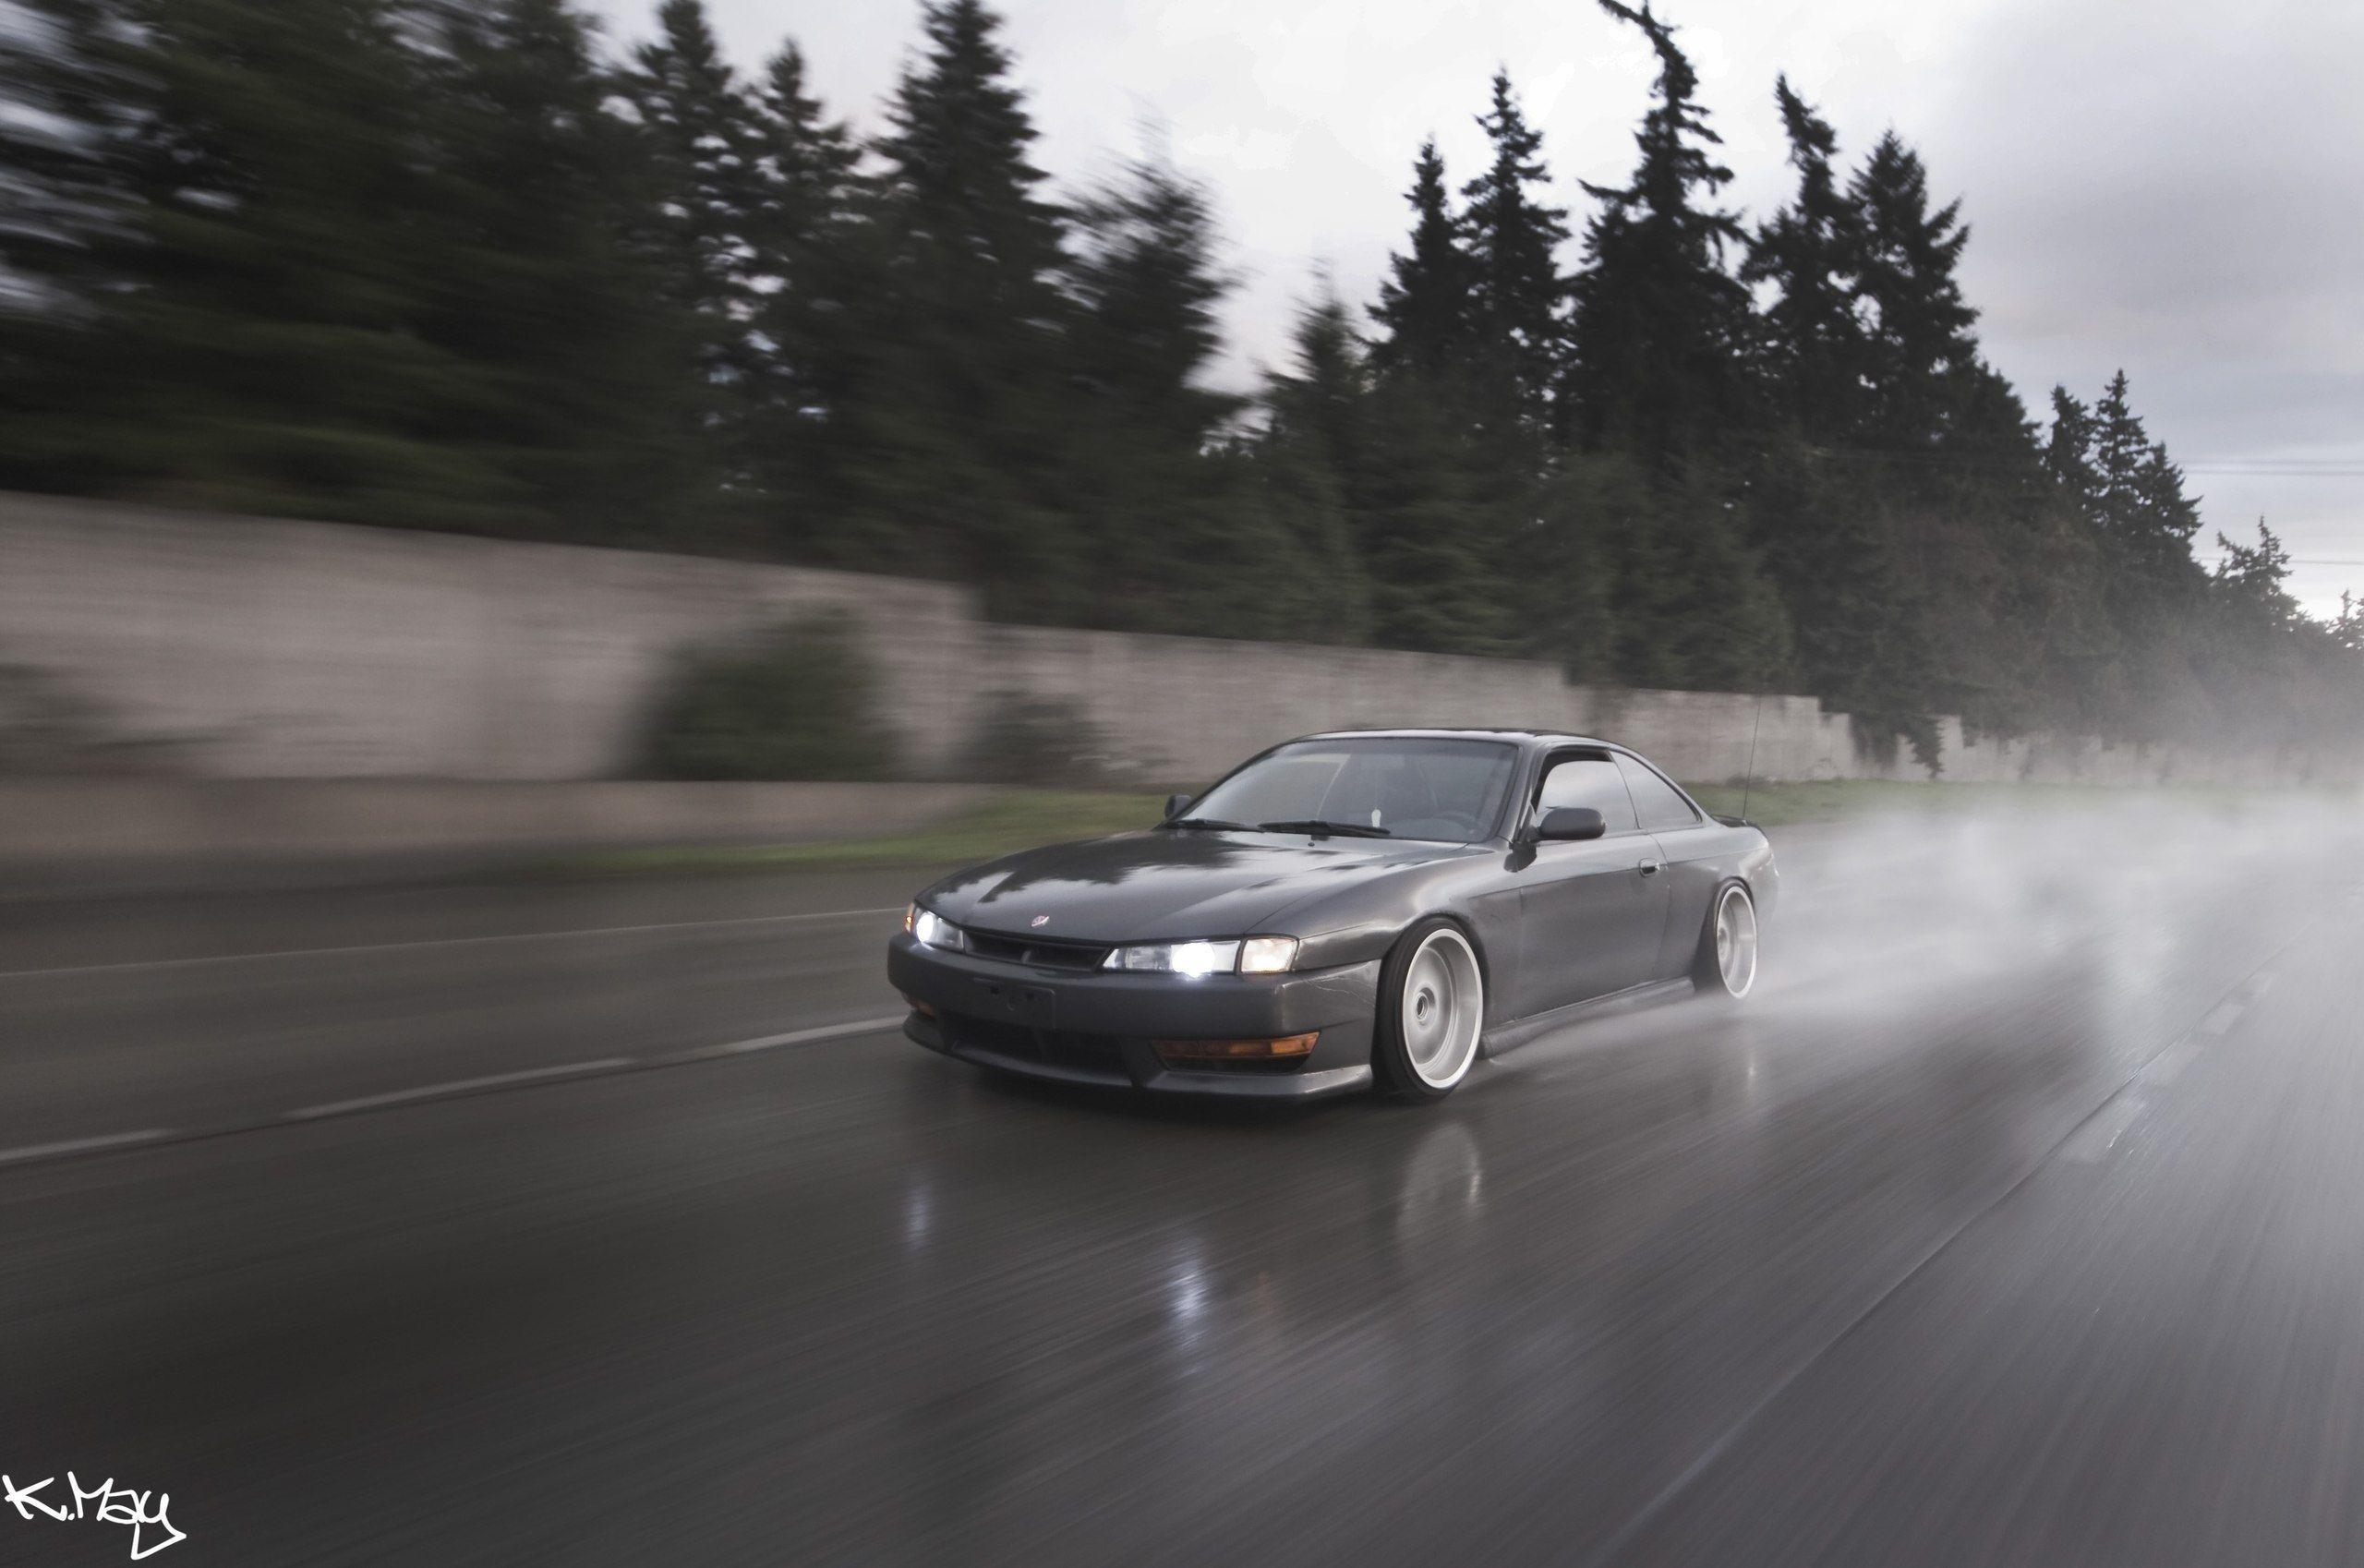 Nissan S14 - amazing photo gallery, some information and specifications, as well as users rating ...